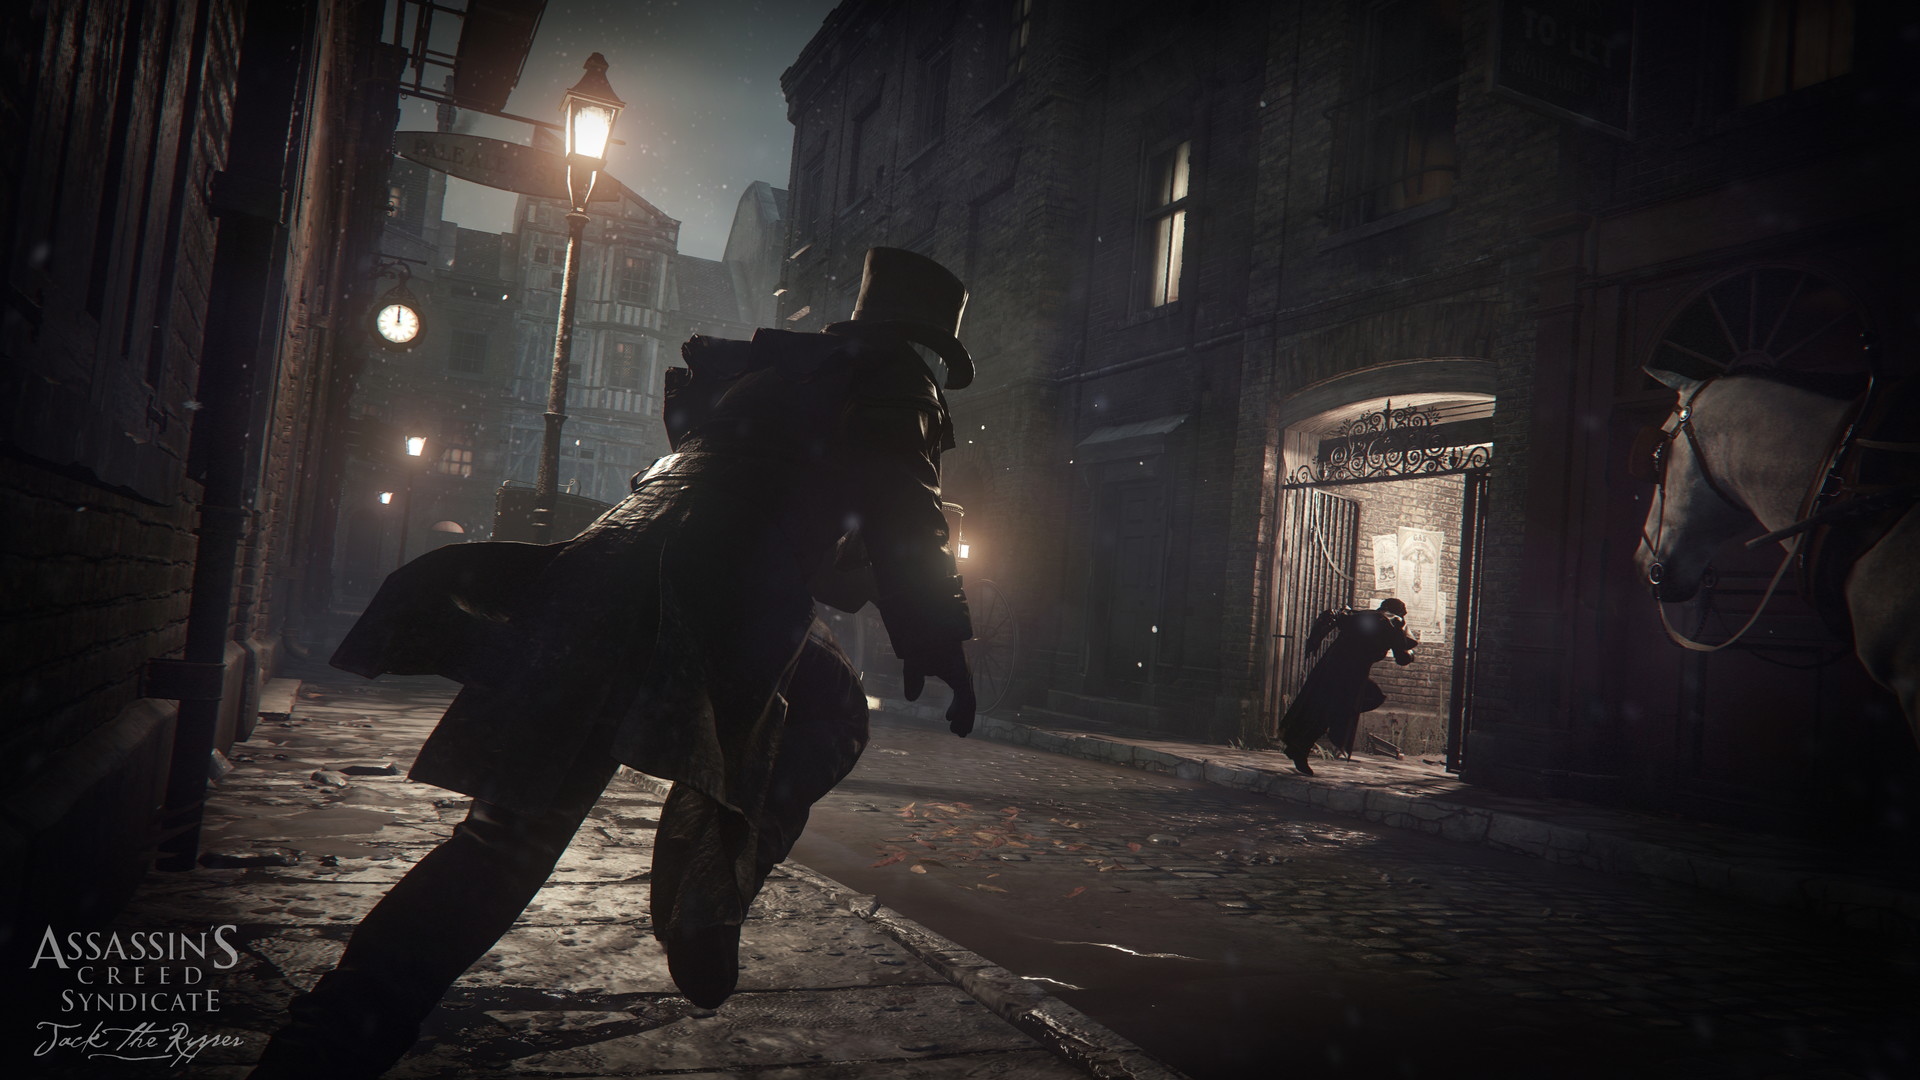 Assassin's Creed: Syndicate - Jack the Ripper - screenshot 3